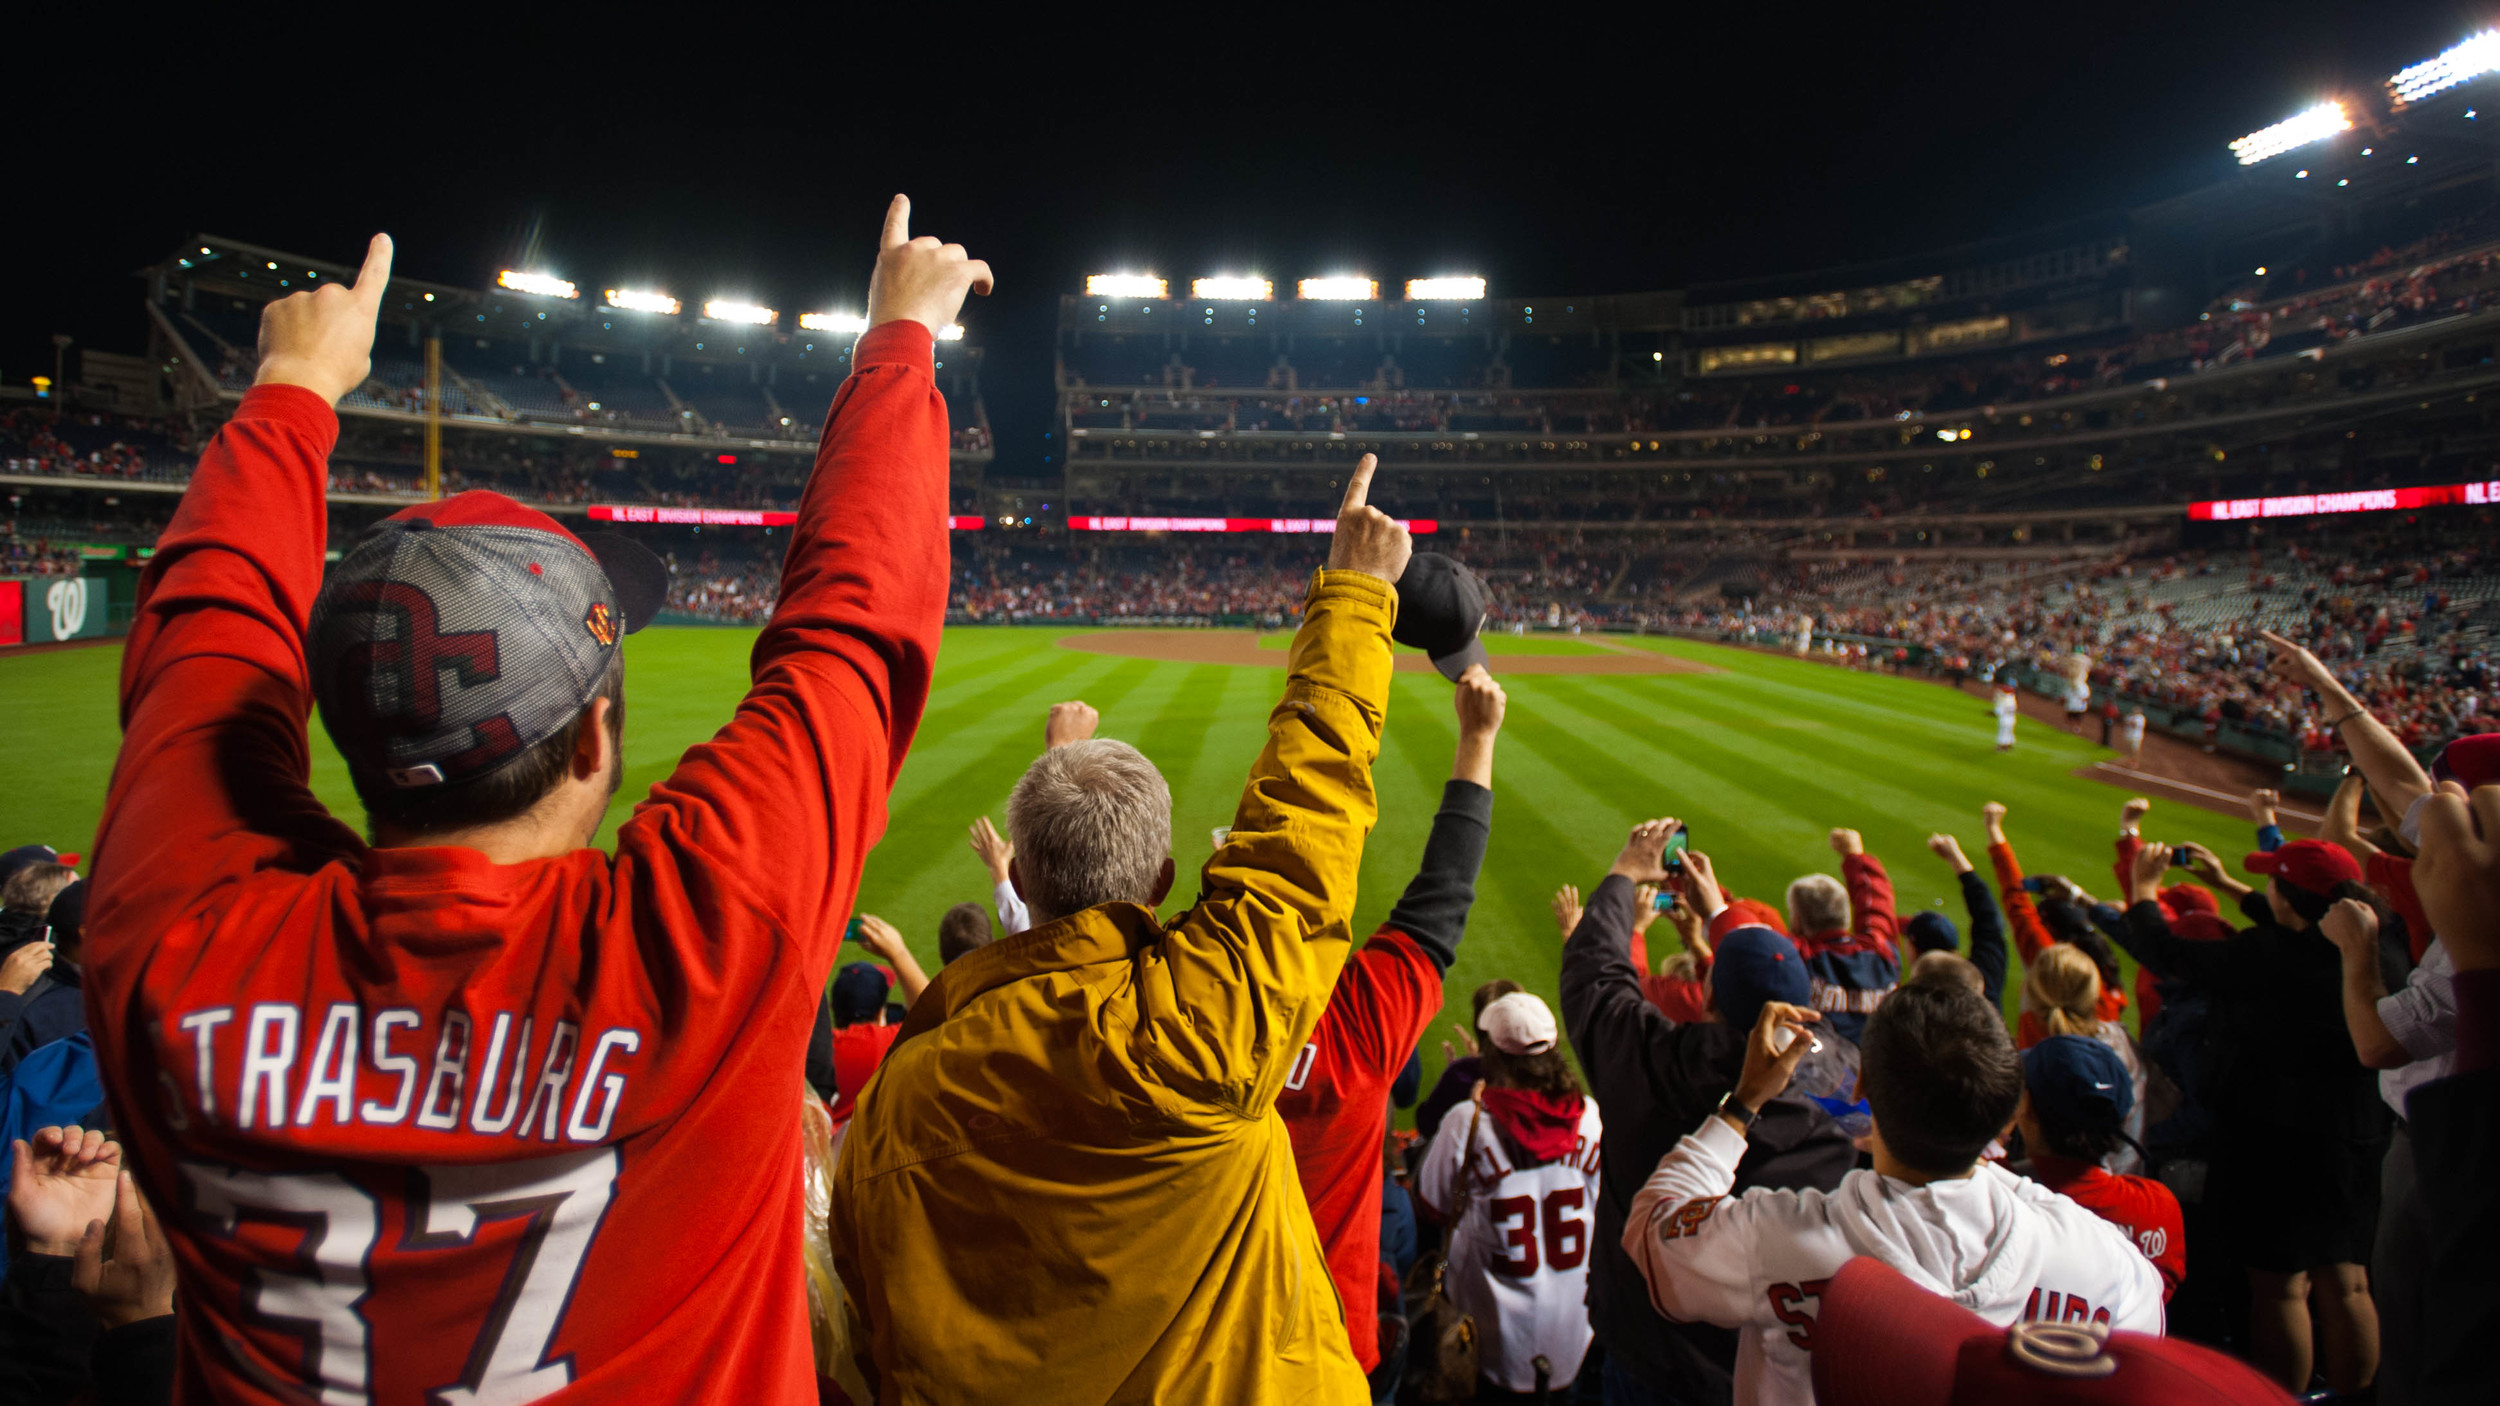  Fans celebrate as the Nationals clinch the division.  (Photo by Marlon Correa/The Washington Post) 